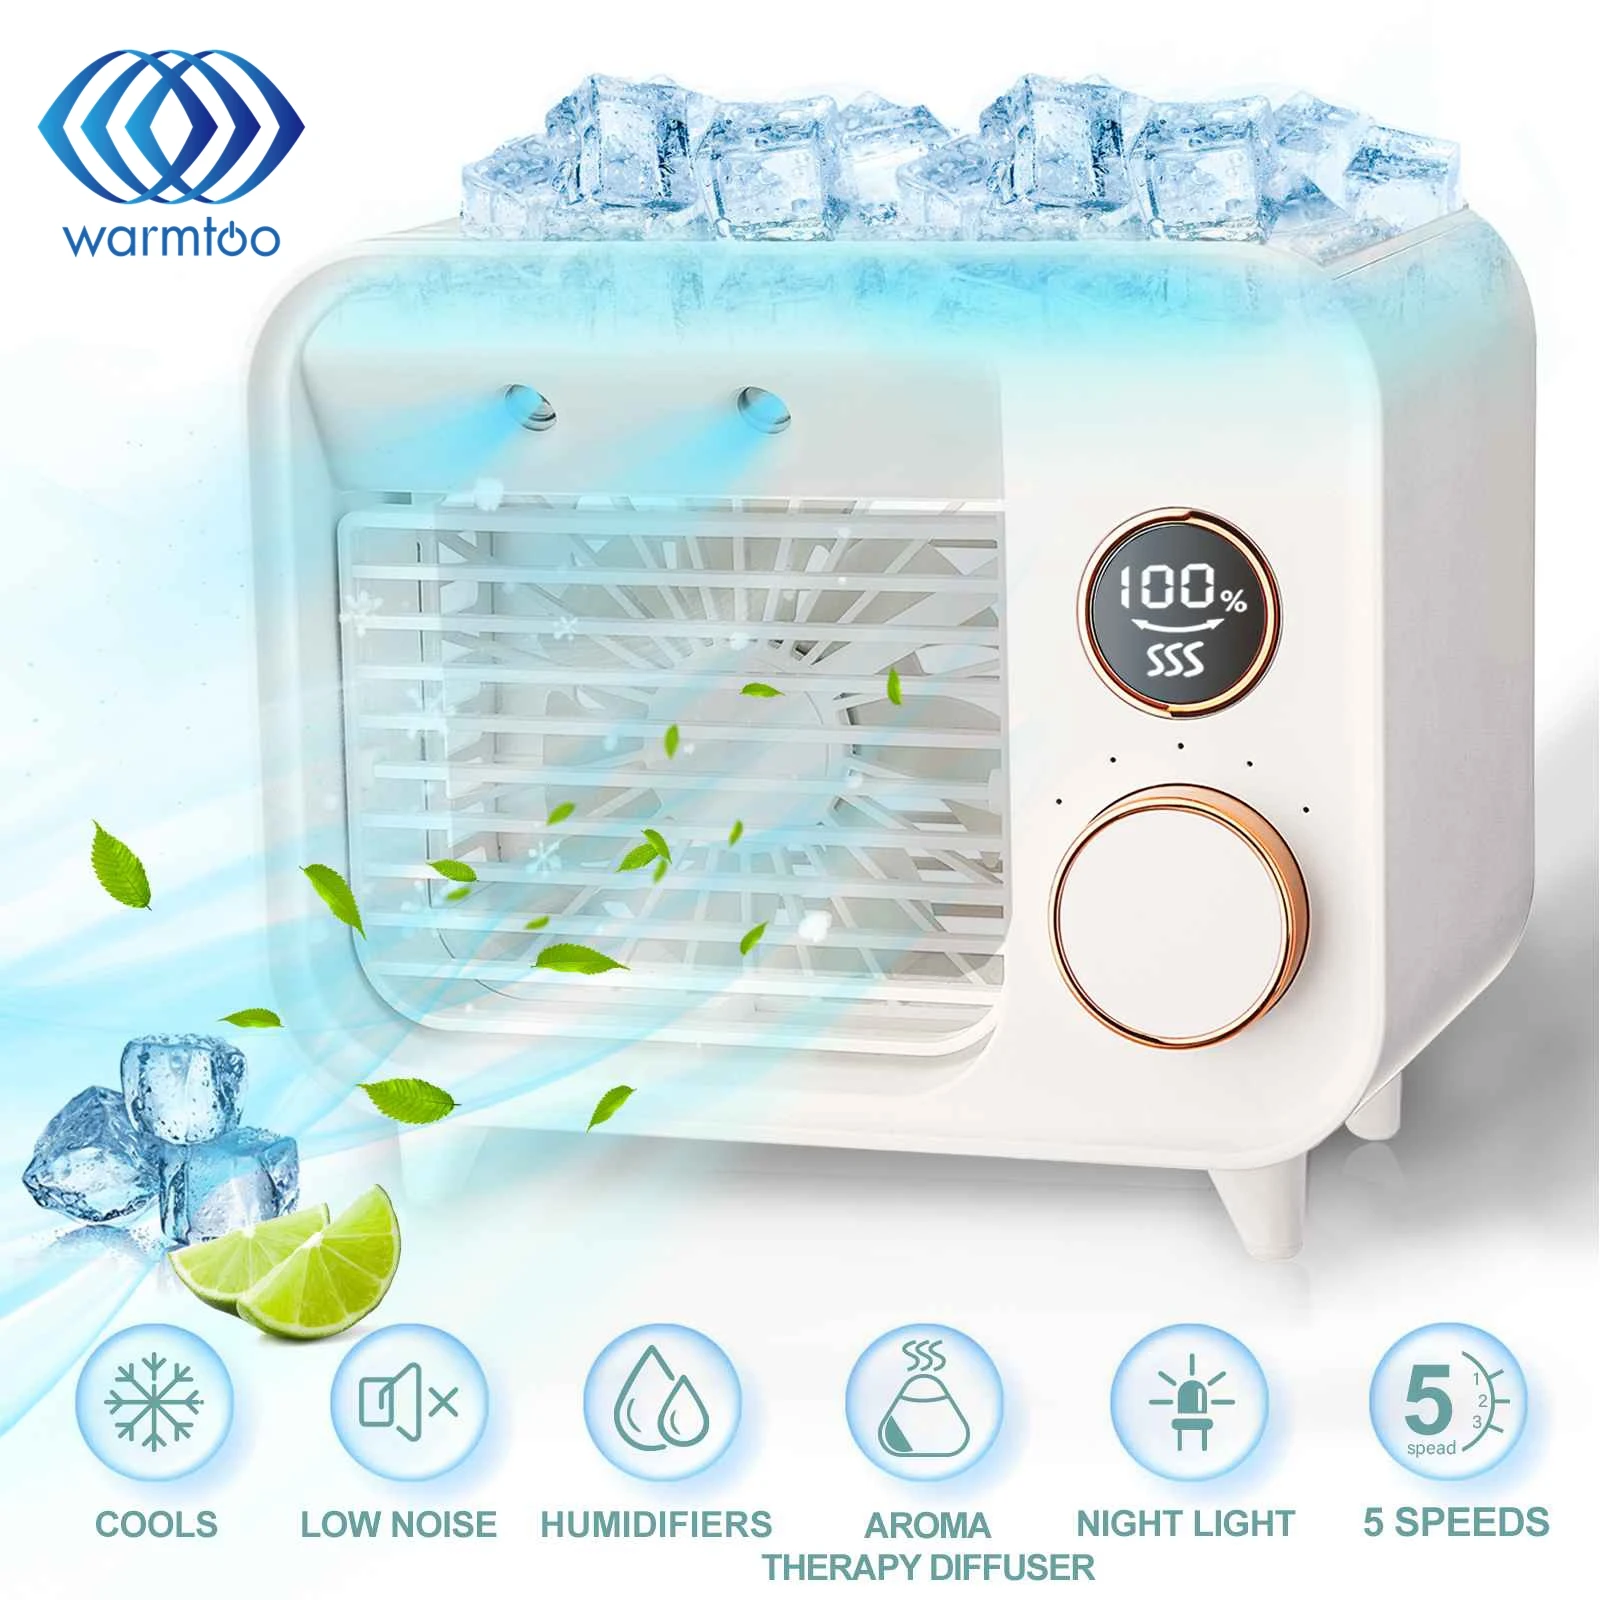 Portable Mini Air Conditioner Air Cooler Spray Water Cooling Fan Humidifier LED Light 5 Speeds Desk Personal AC Fan for Office